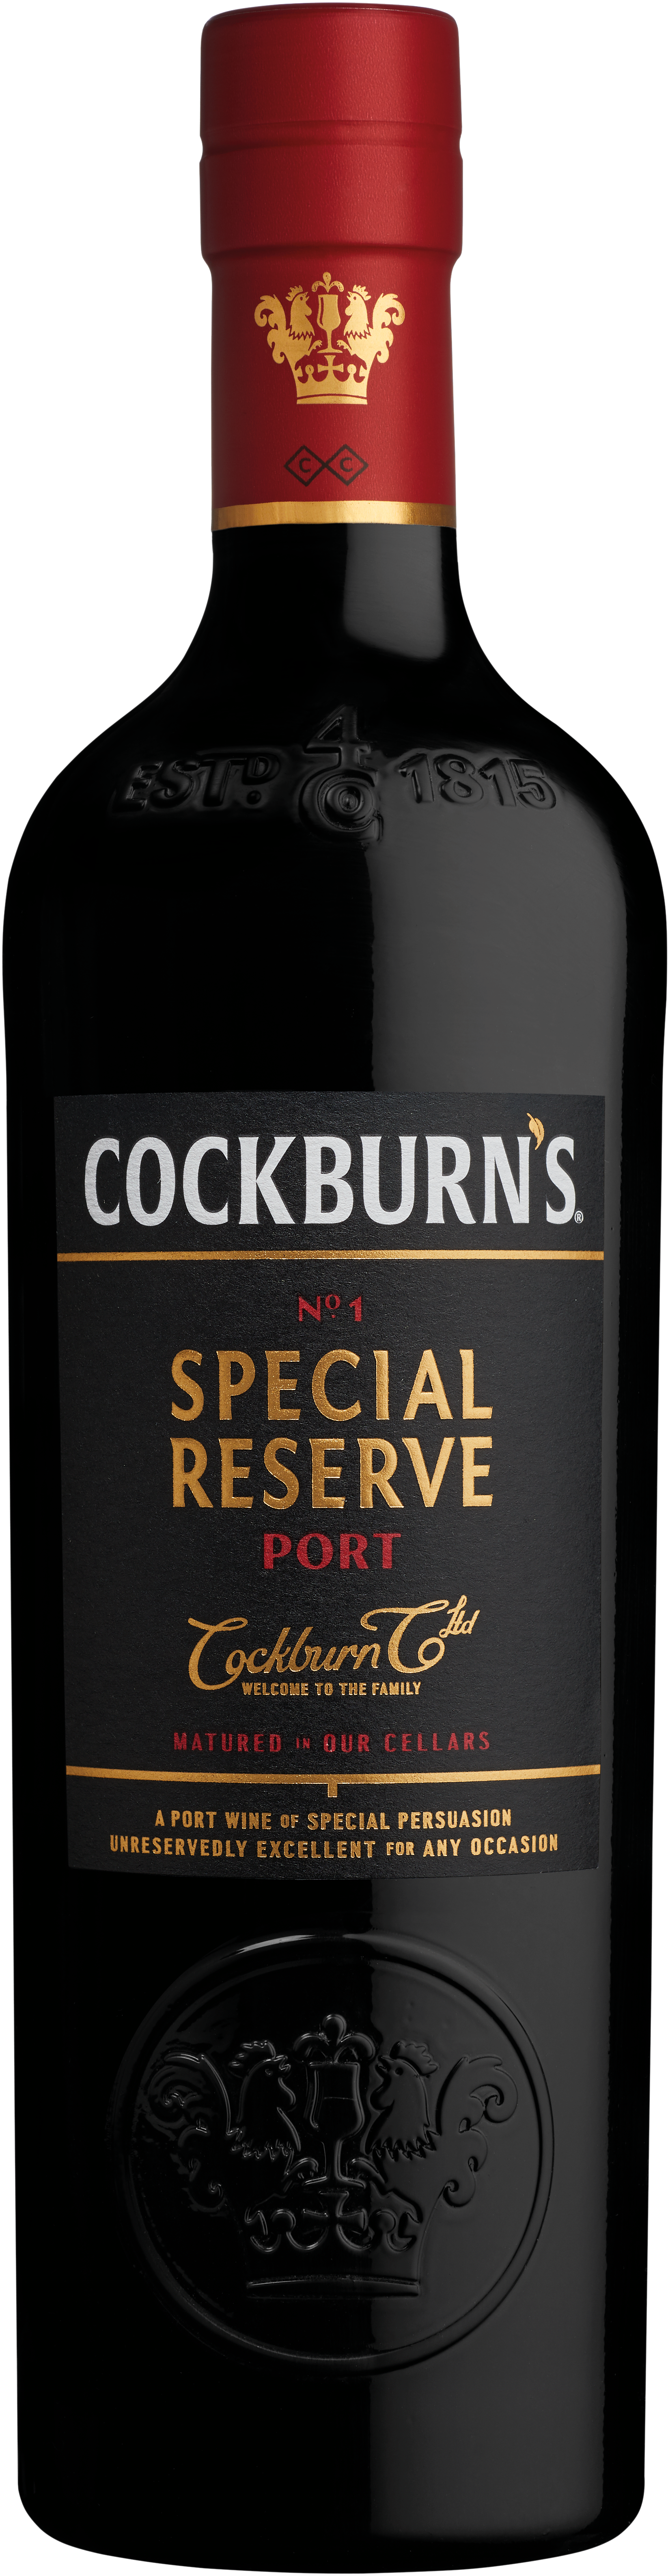 Product Image for COCKBURN'S SPECIAL RESERVE PORT 